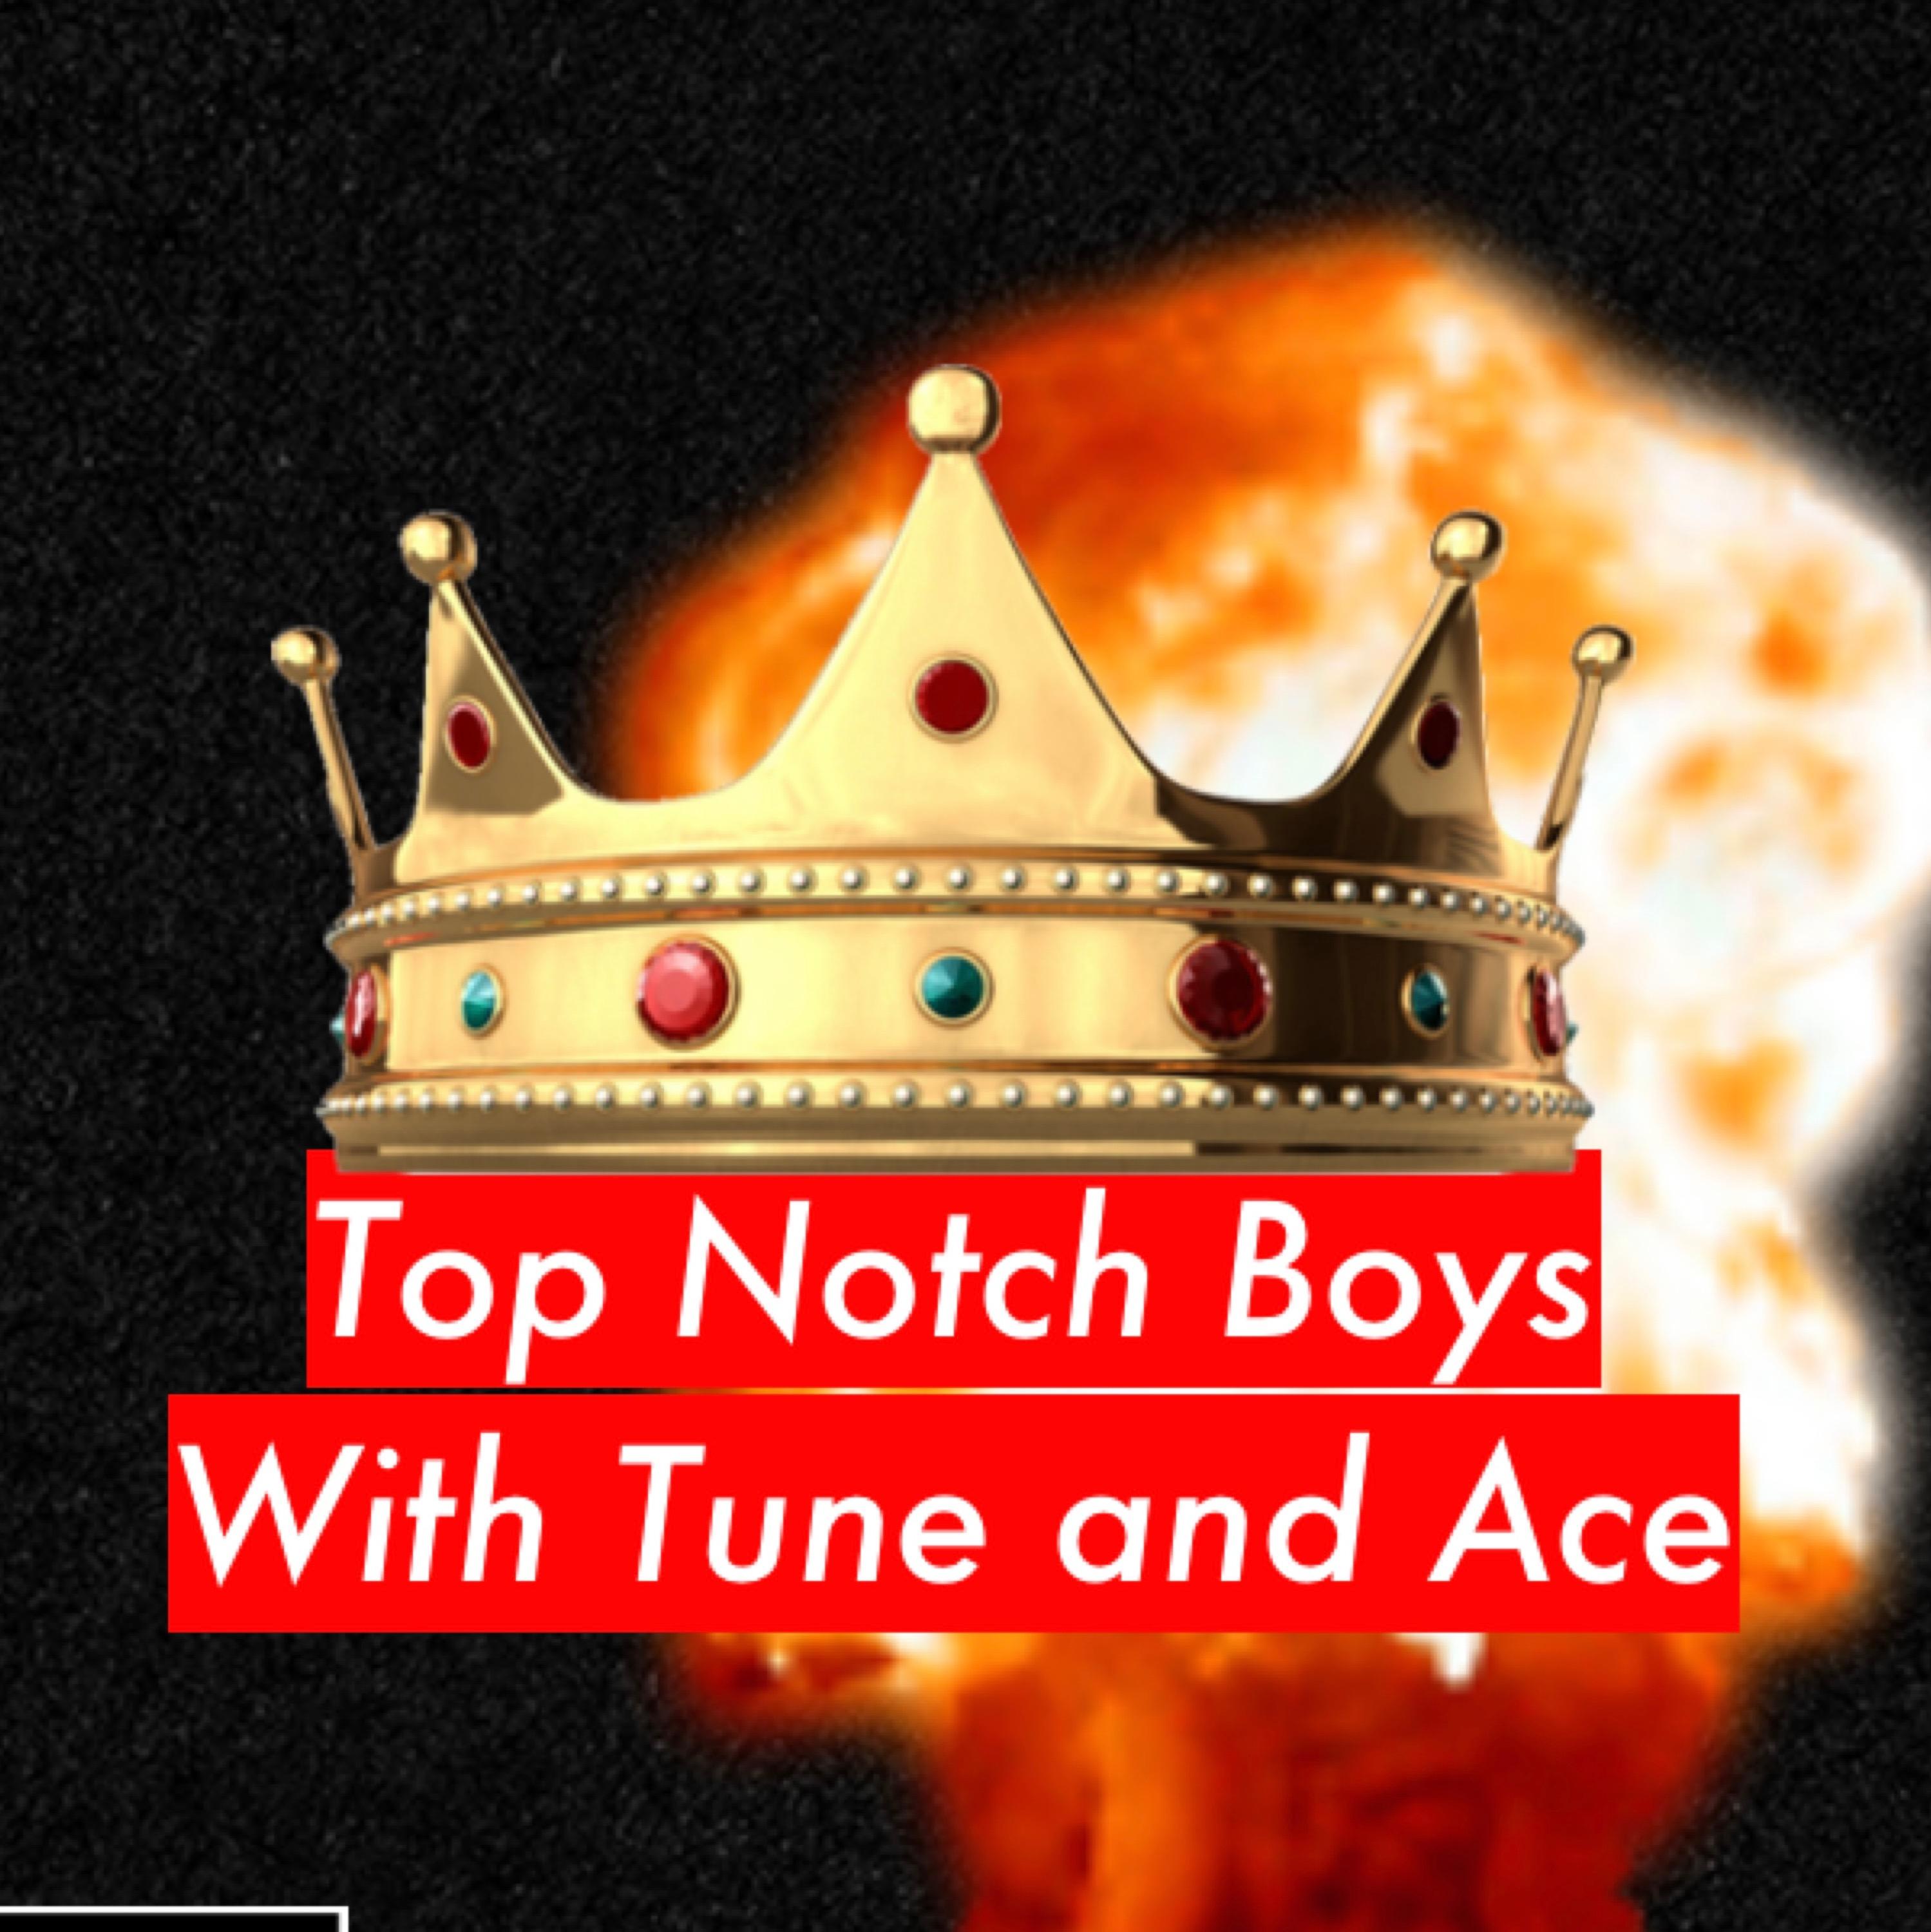 Top Notch Boys with Tune and Ace